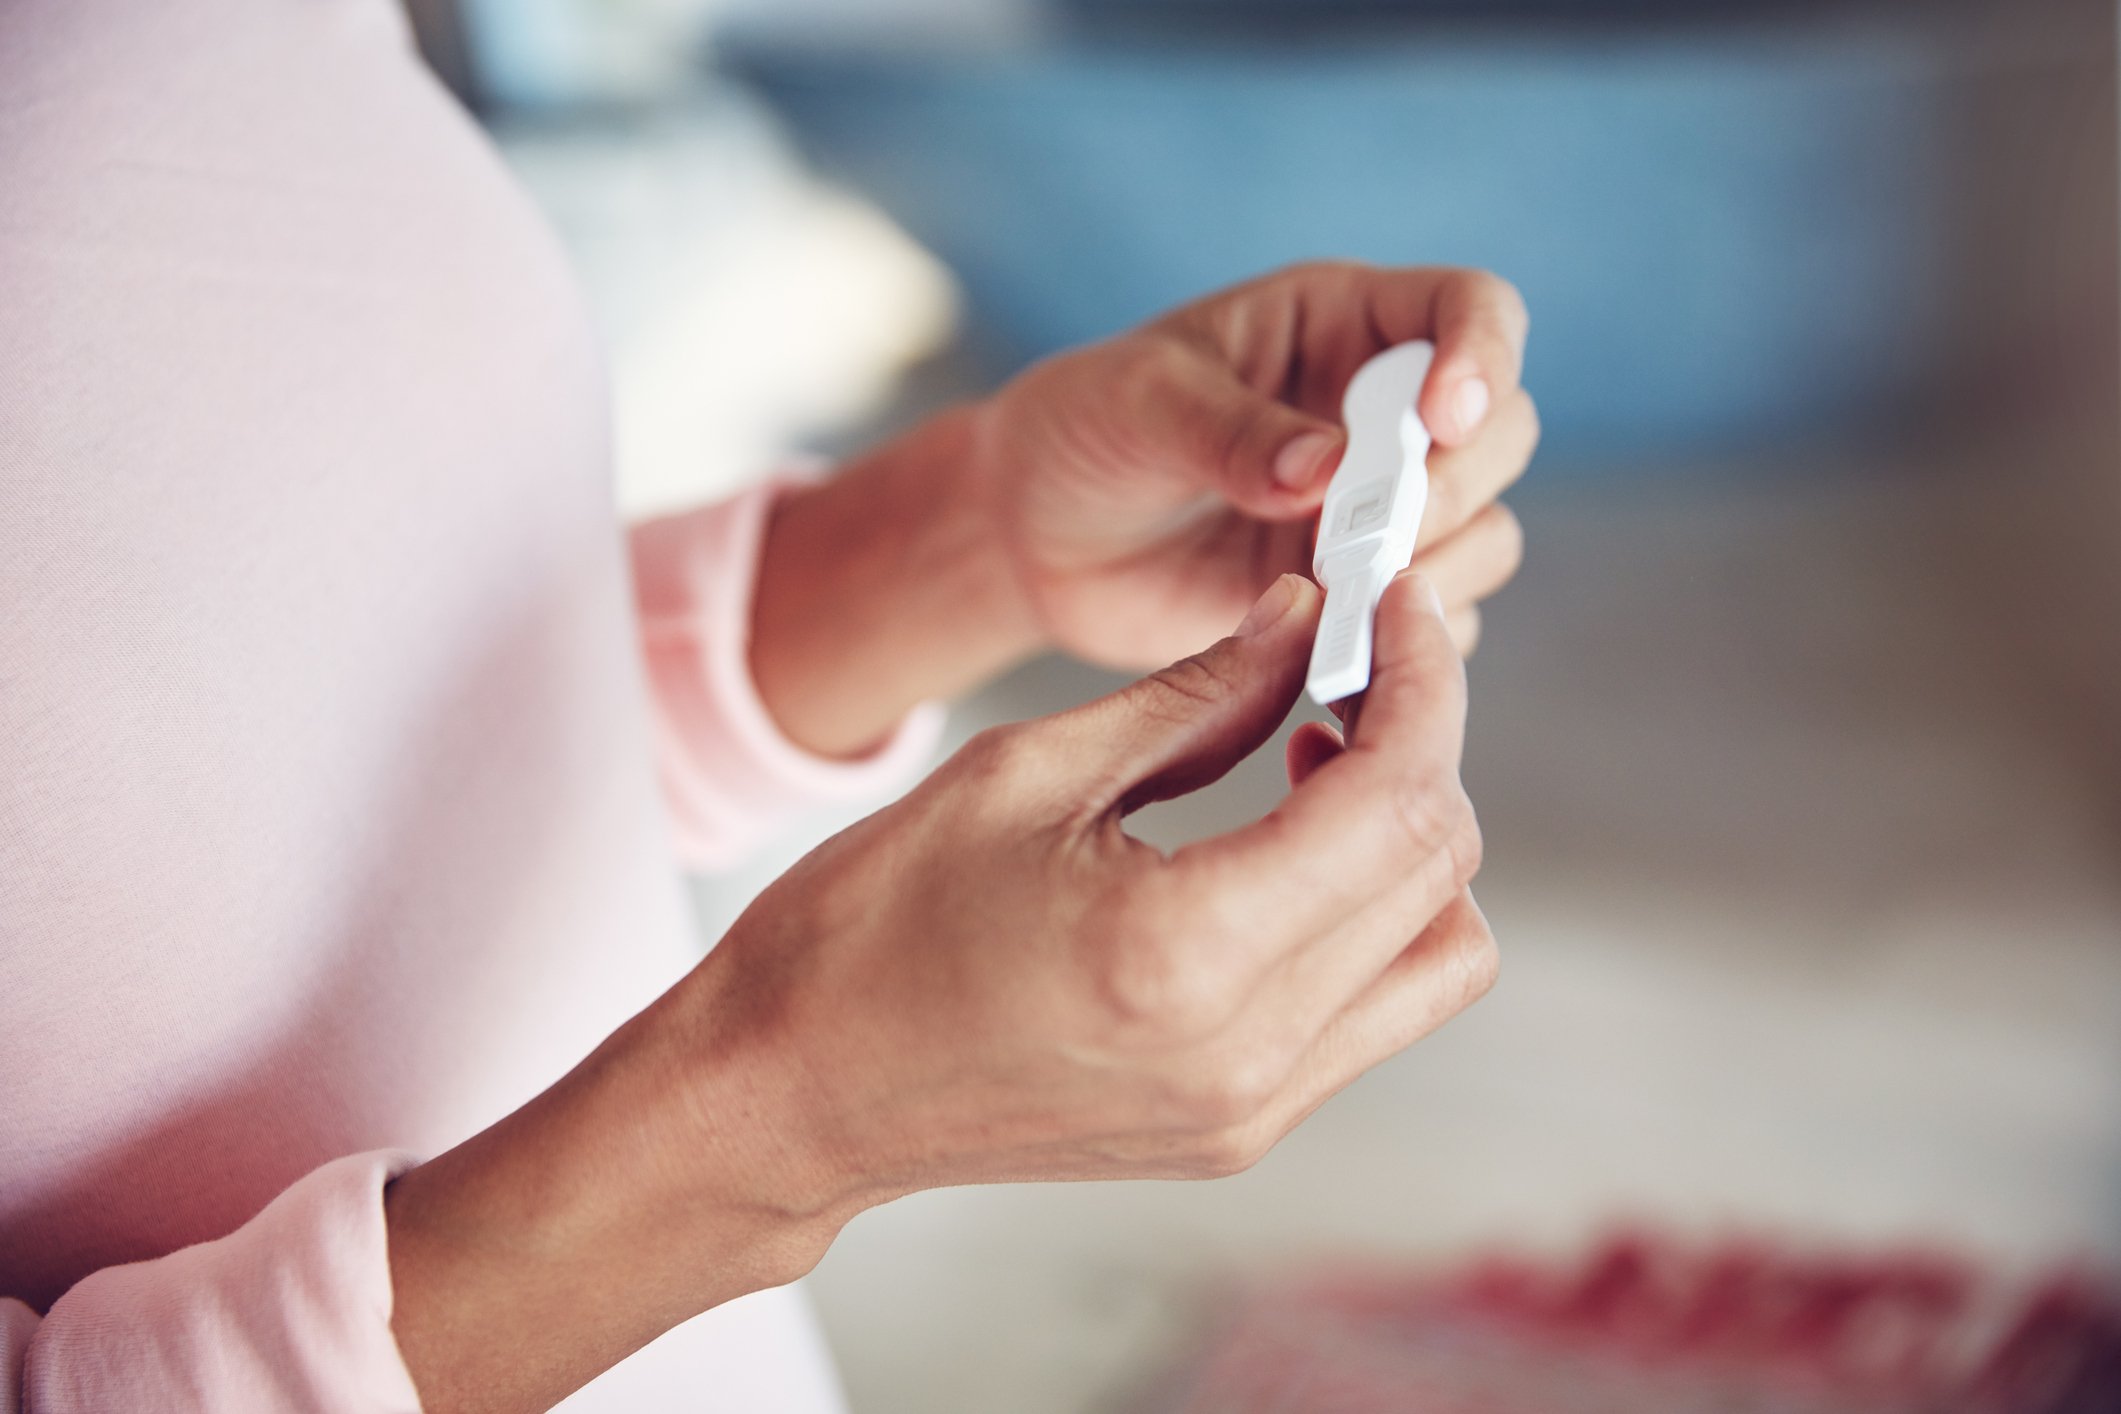 A woman takes an ovulation test after experiencing symptoms of ovulation.